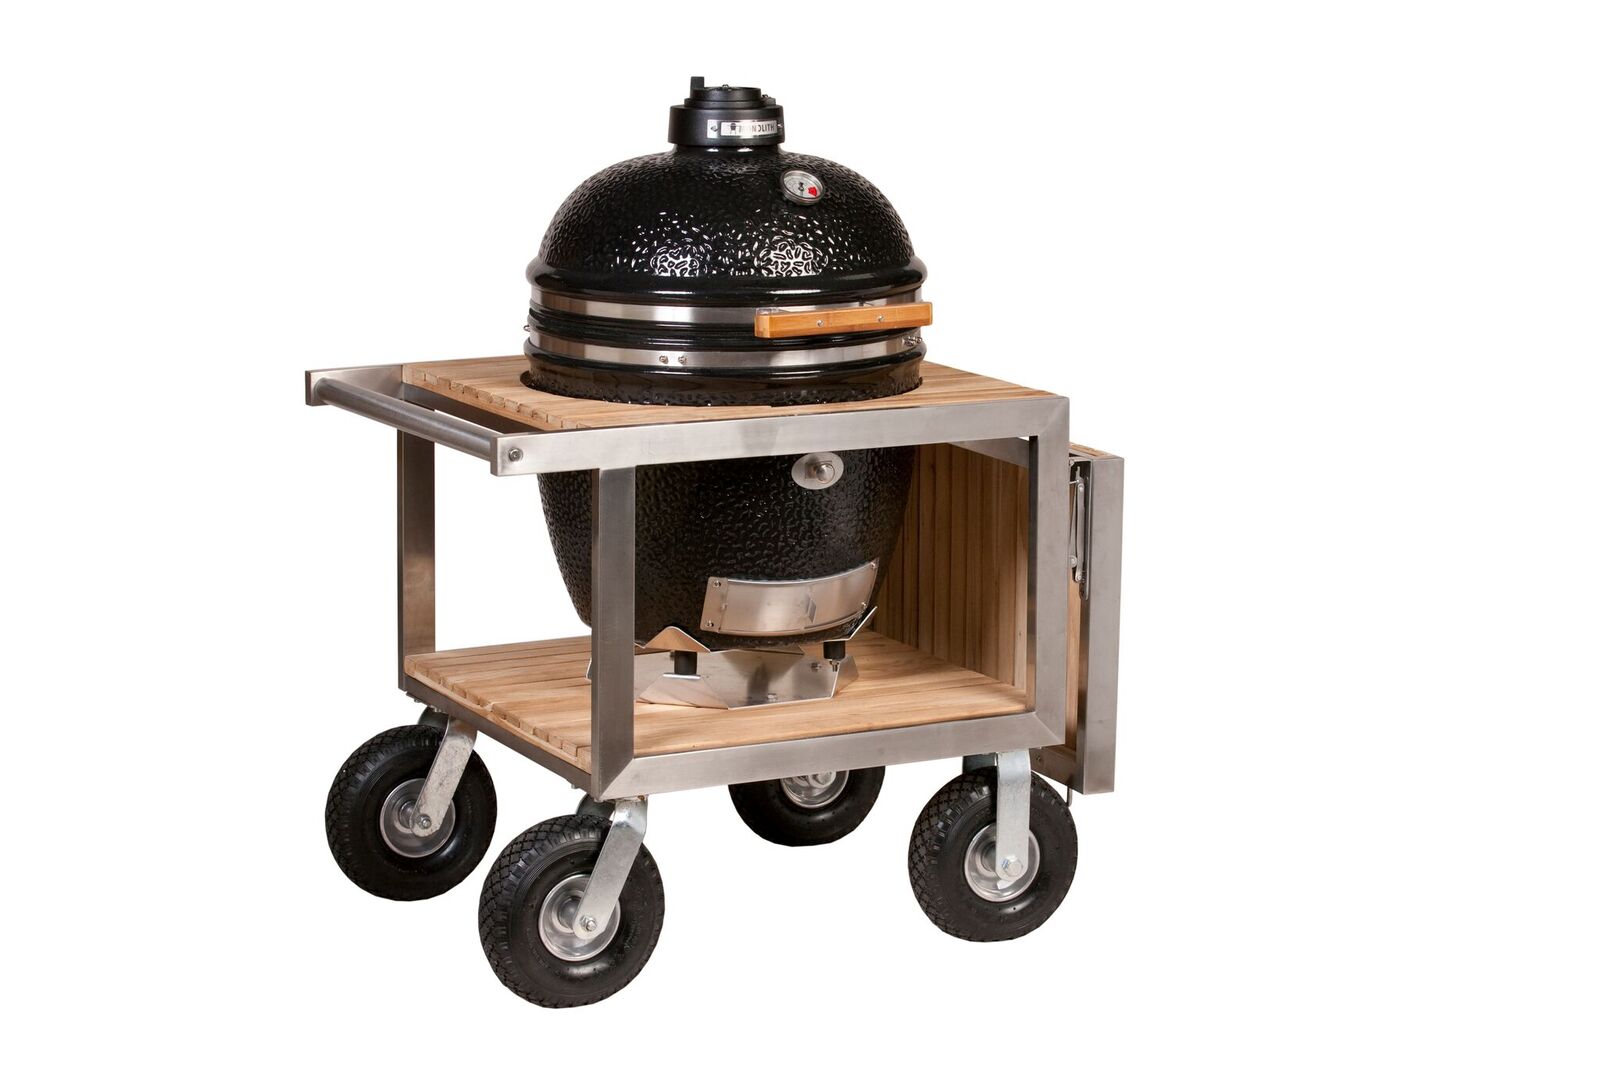 The Monolith ceramic grill in the stainless steel framed buggy with folding side shelf